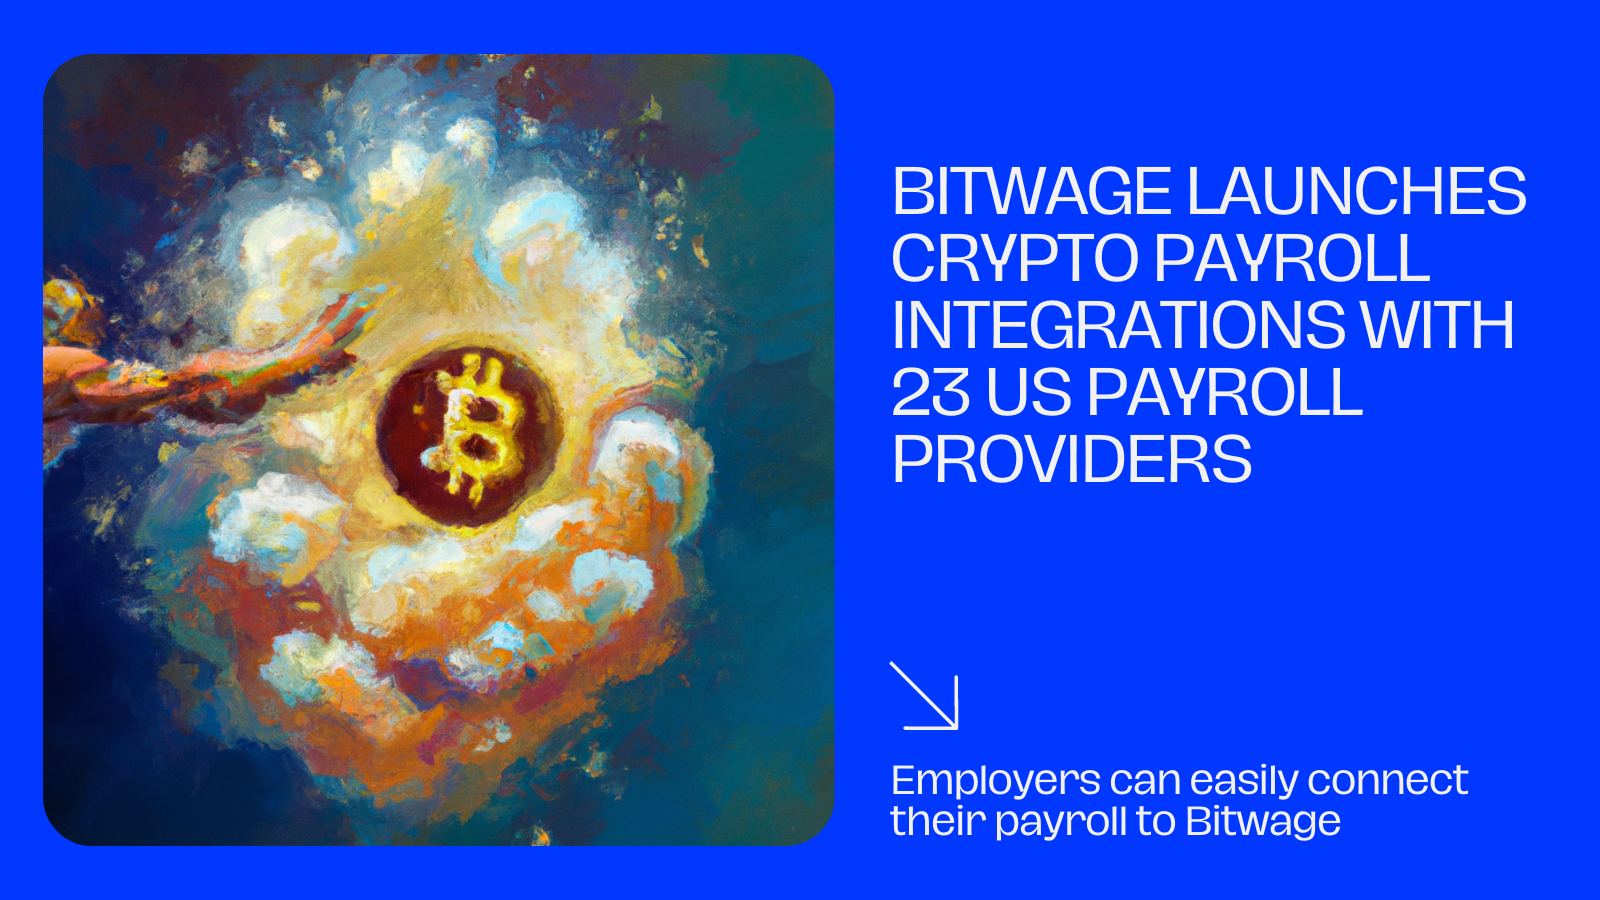 Bitwage Launches Crypto Payroll Integrations With 23 US Payroll Providers